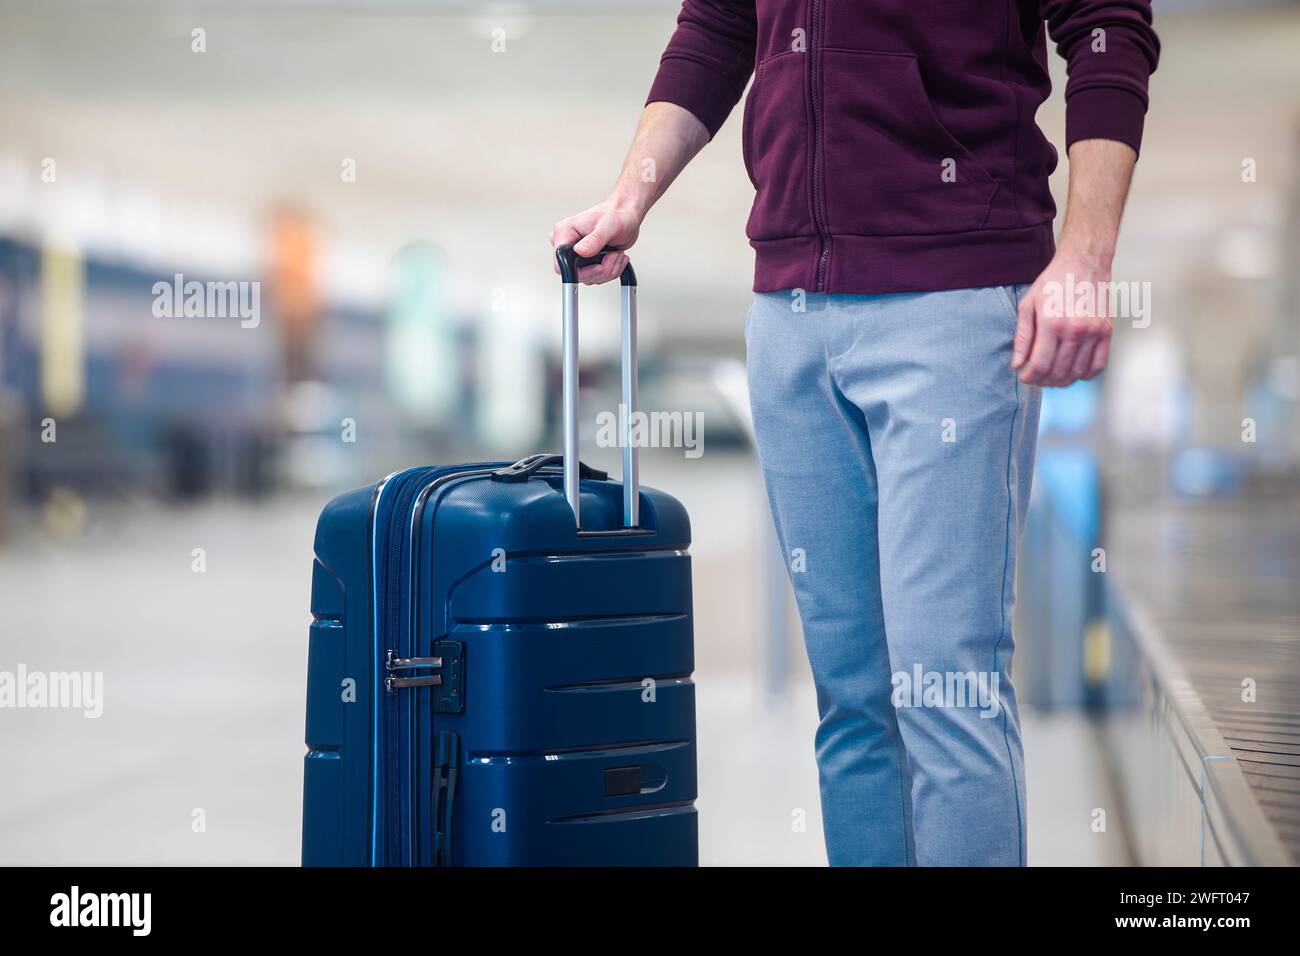 Passenger traveling by plane picking up blue suitcase from conveyor belt in airport arrivals terminal. Stock Photo